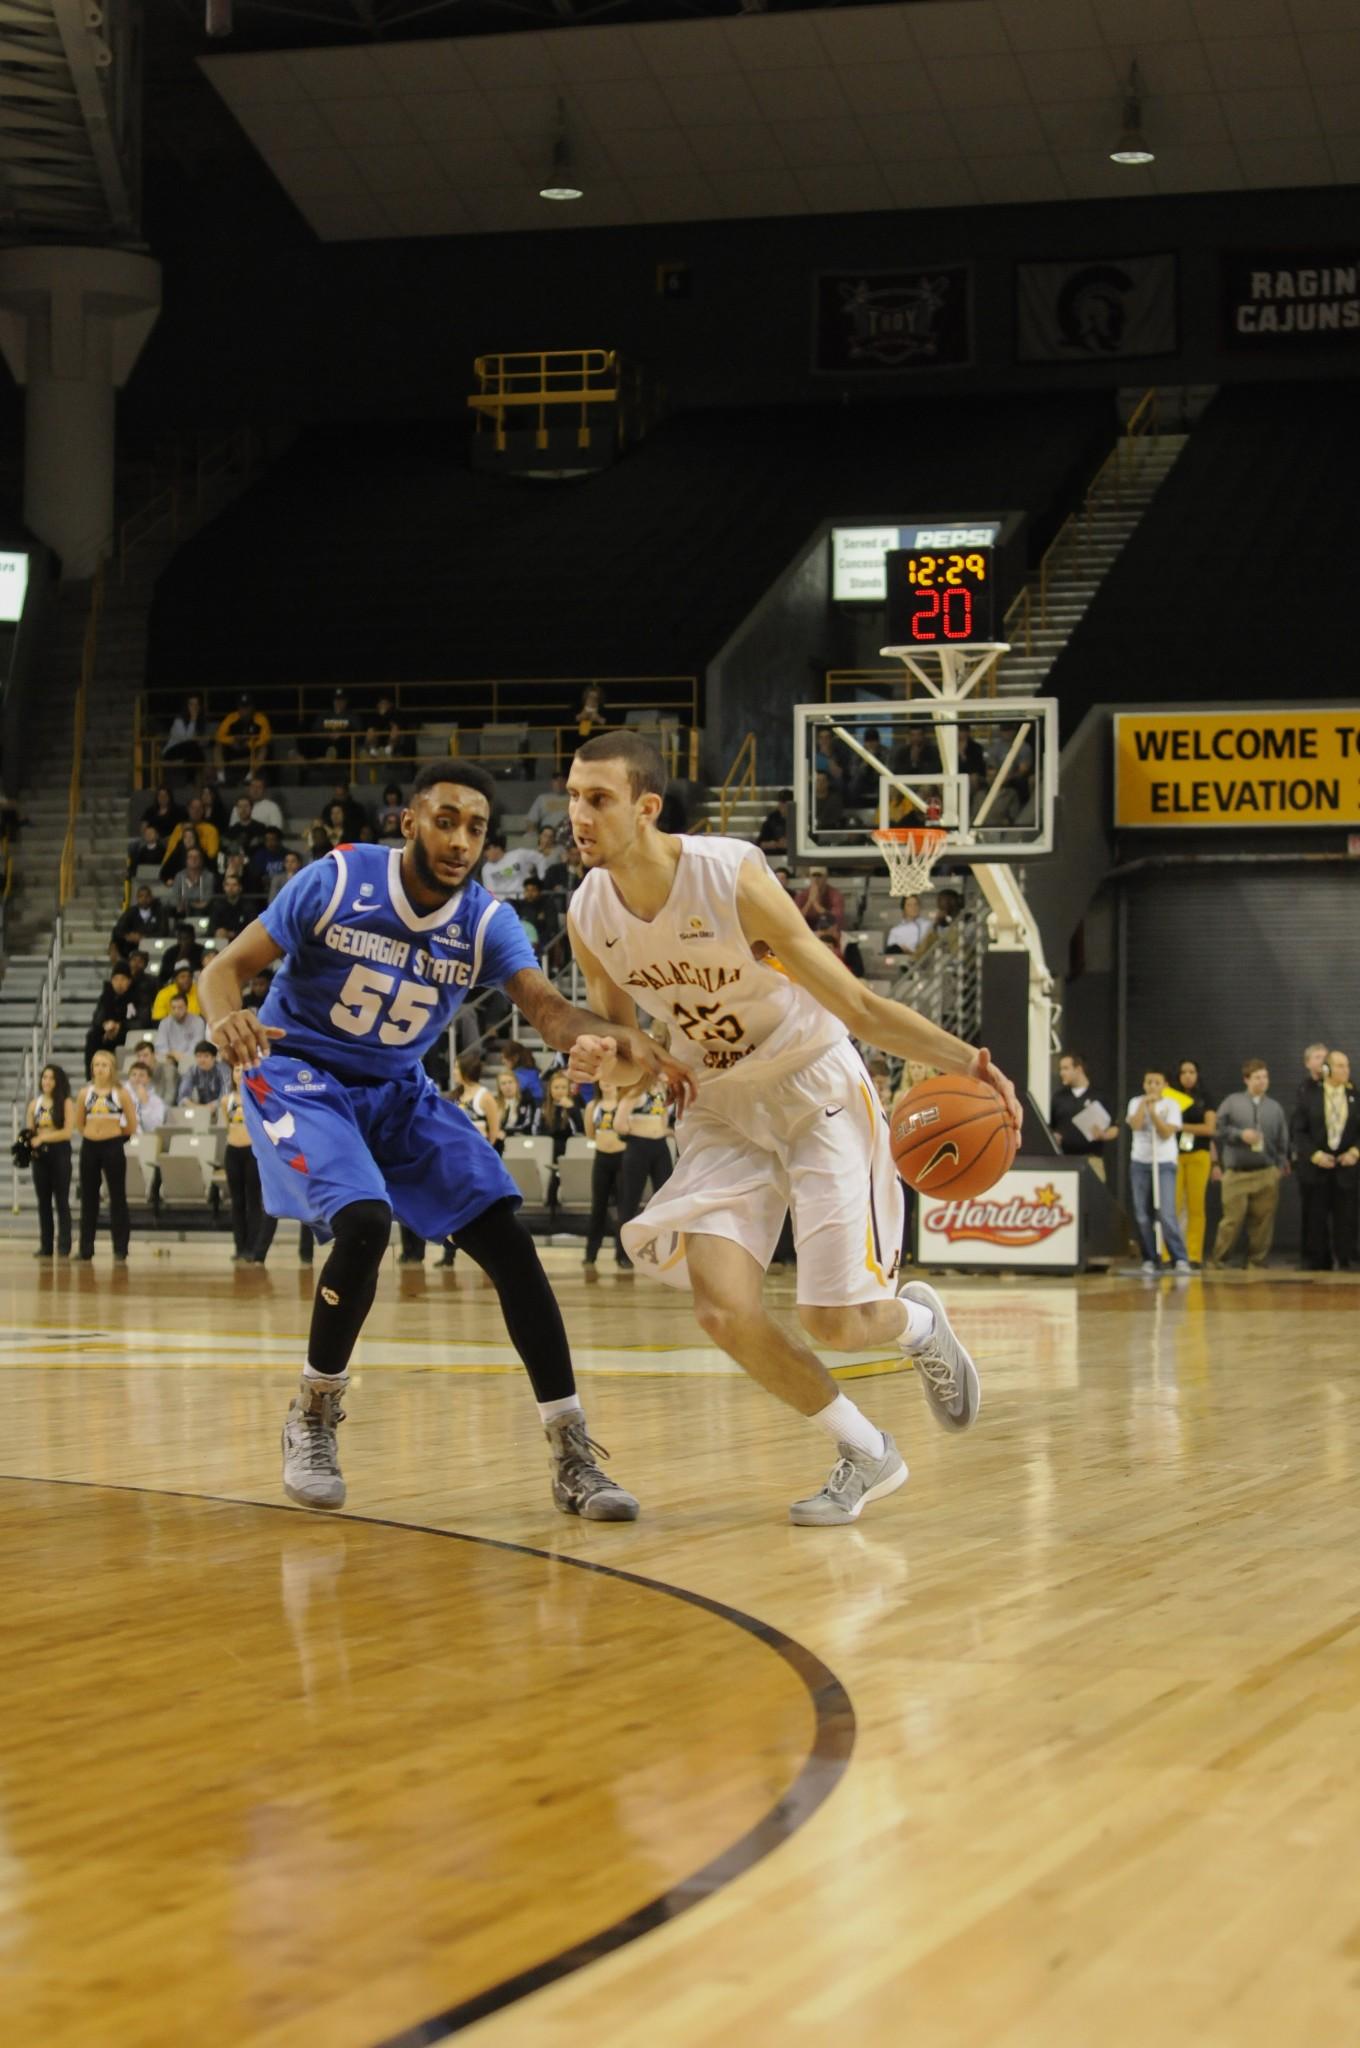 Freshman+guard+Jake+Babic+dribbles+around+a+defender+in+a+game+against+Georgia+State.+Babic+is+tied+for+fifth+on+the+team+in+scoring.+Photo+by+Justin+Perry++%7C++The+Appalachian